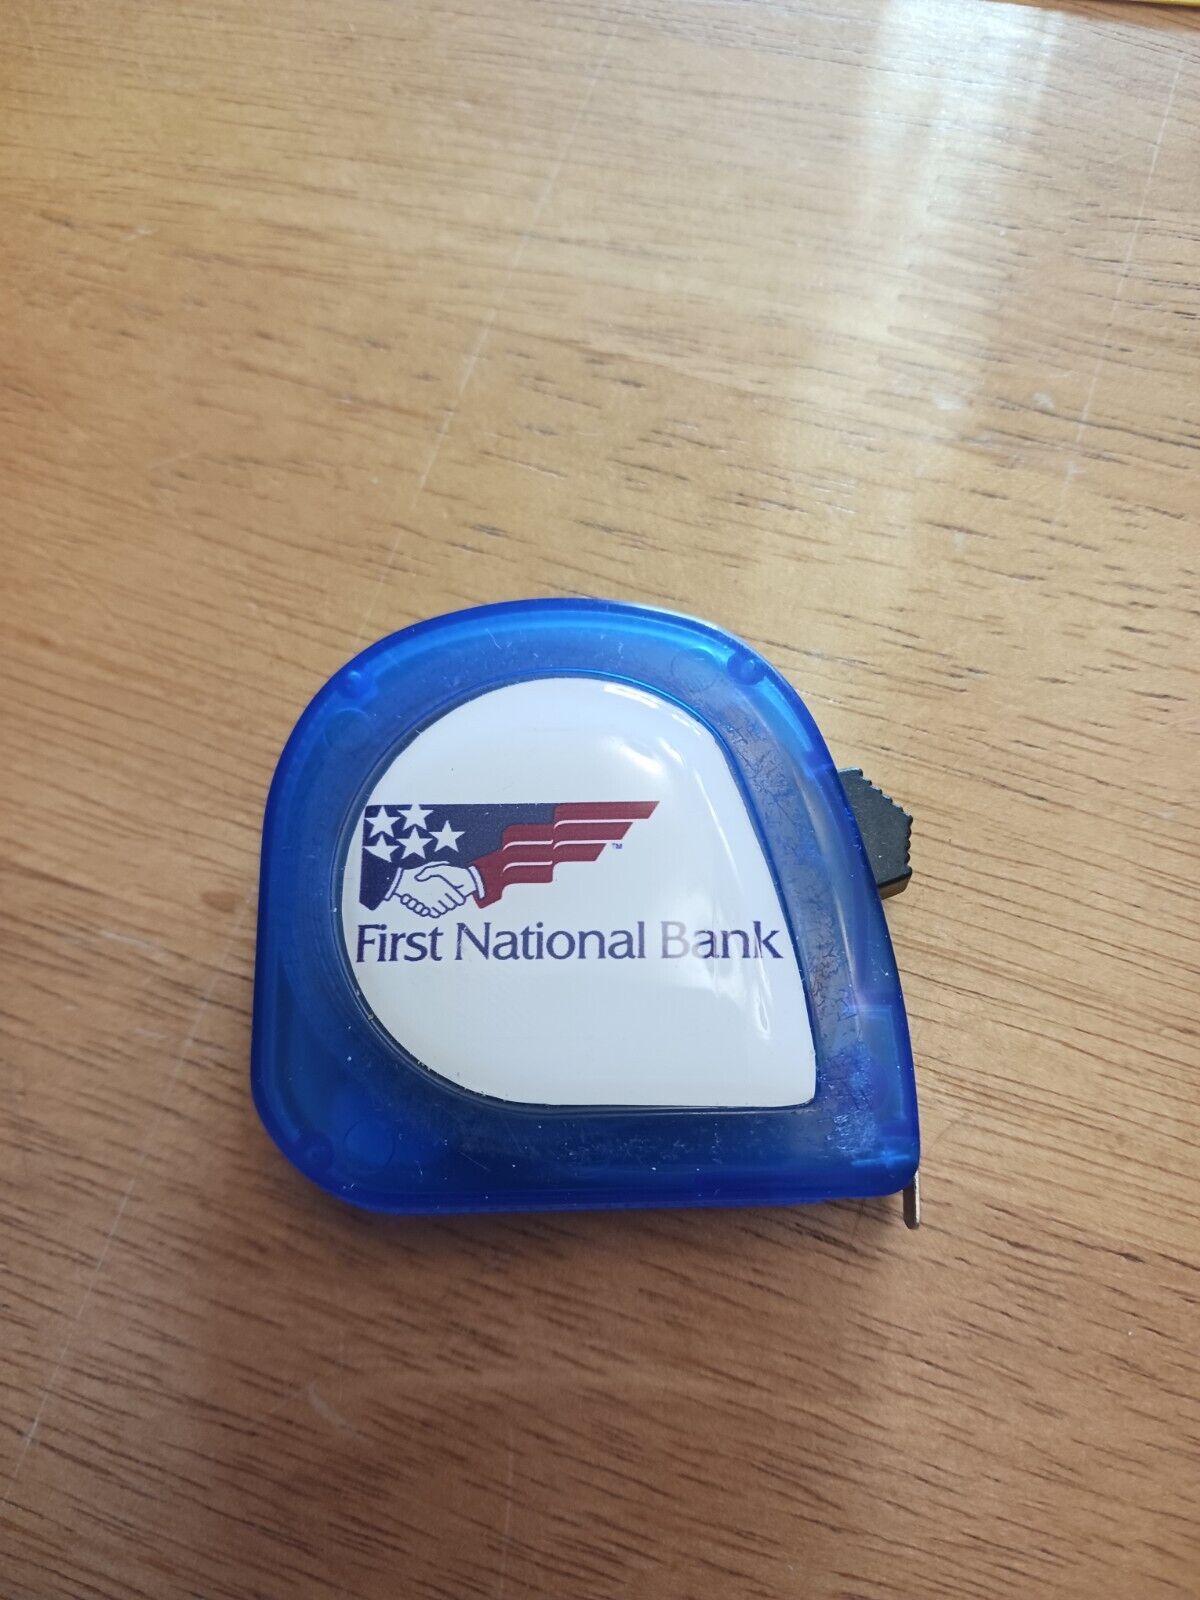 FIRST NATIONAL BANK, PITTSBURGH PA, TAPE MEASURE